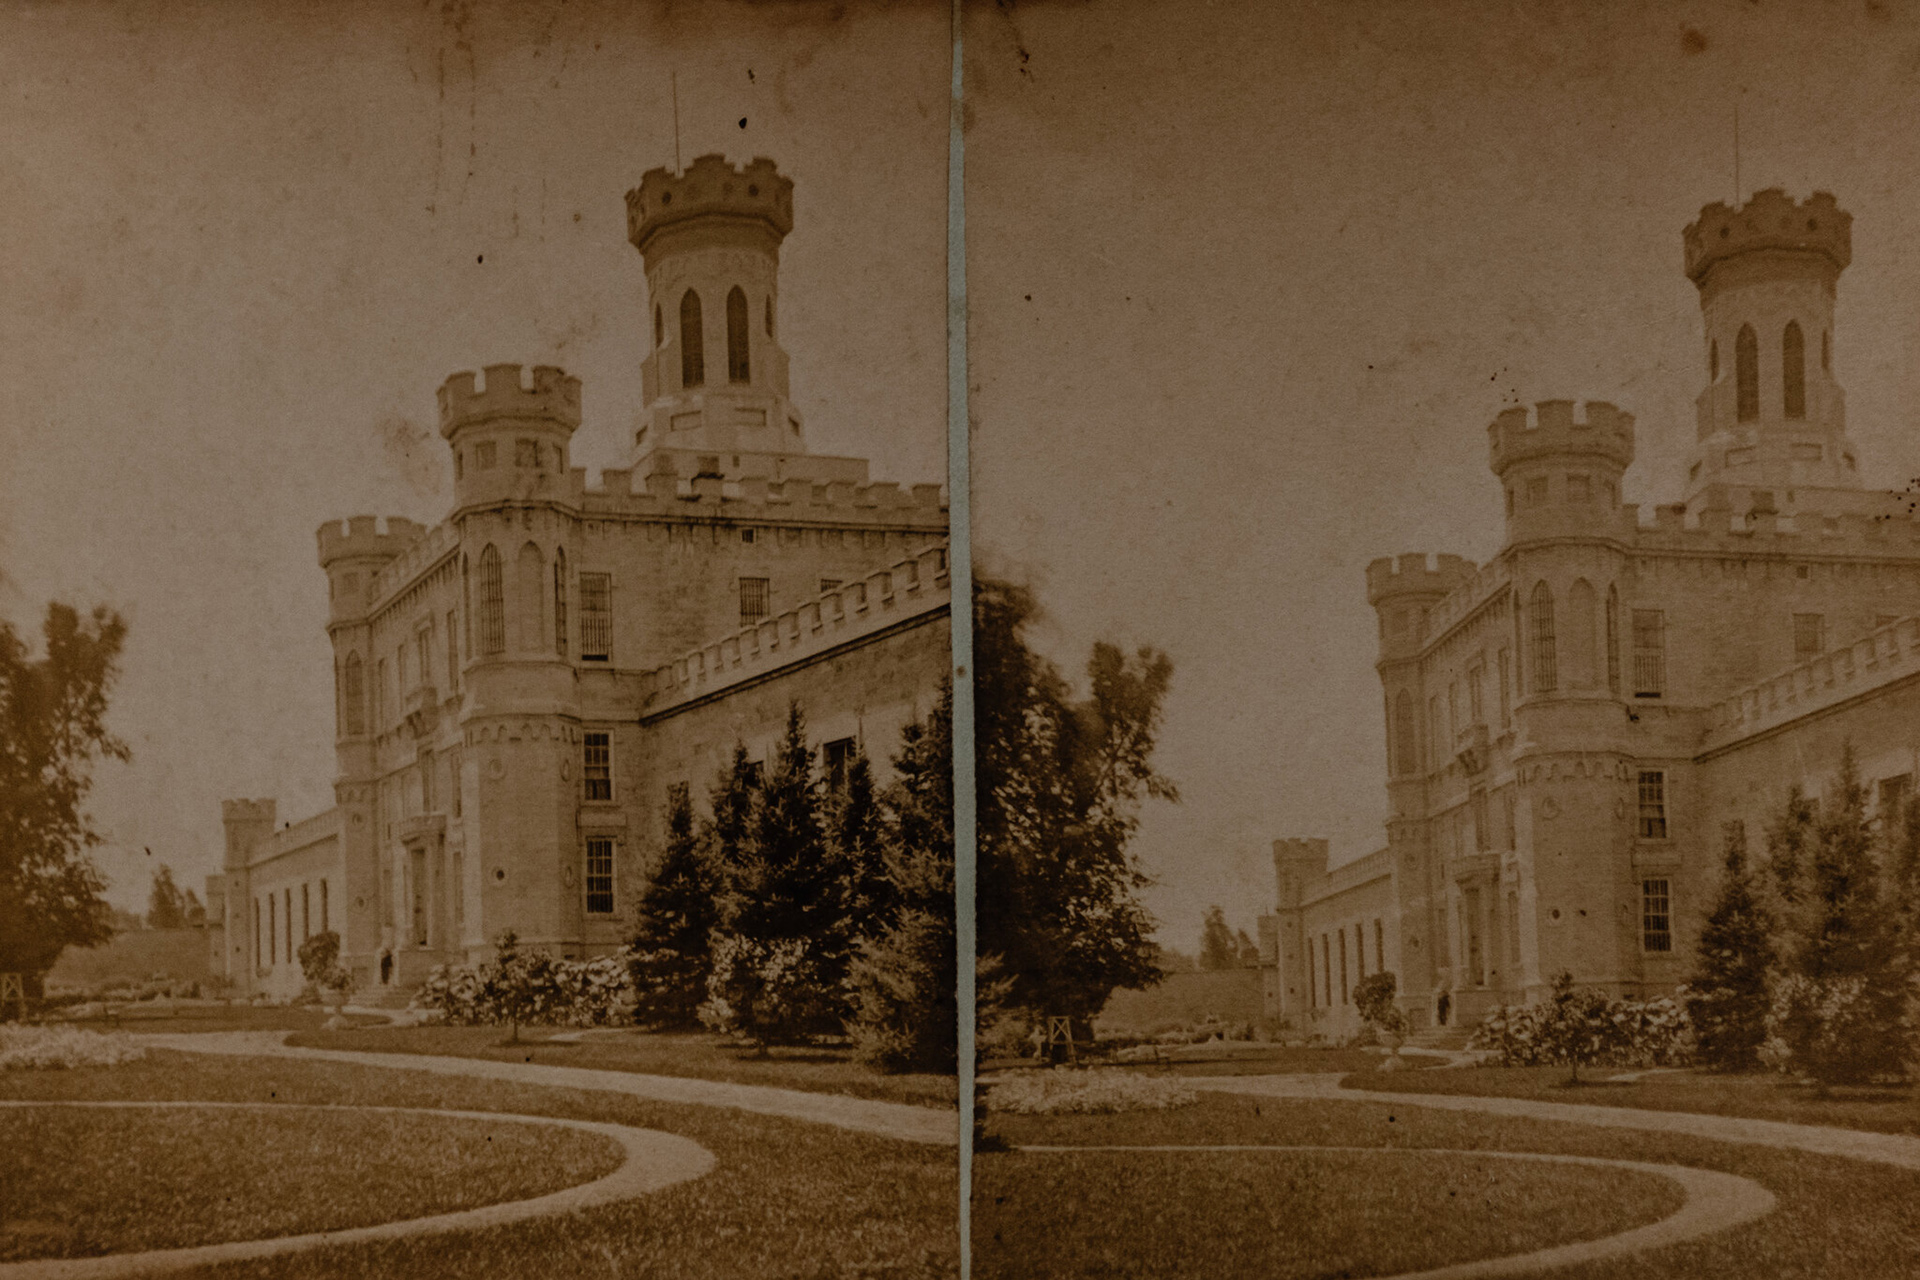 Two sepia-toned photos of a stone masonry building with crenelated walls and towers are arrayed side-by-side to serve as the basis of a stereograph image.